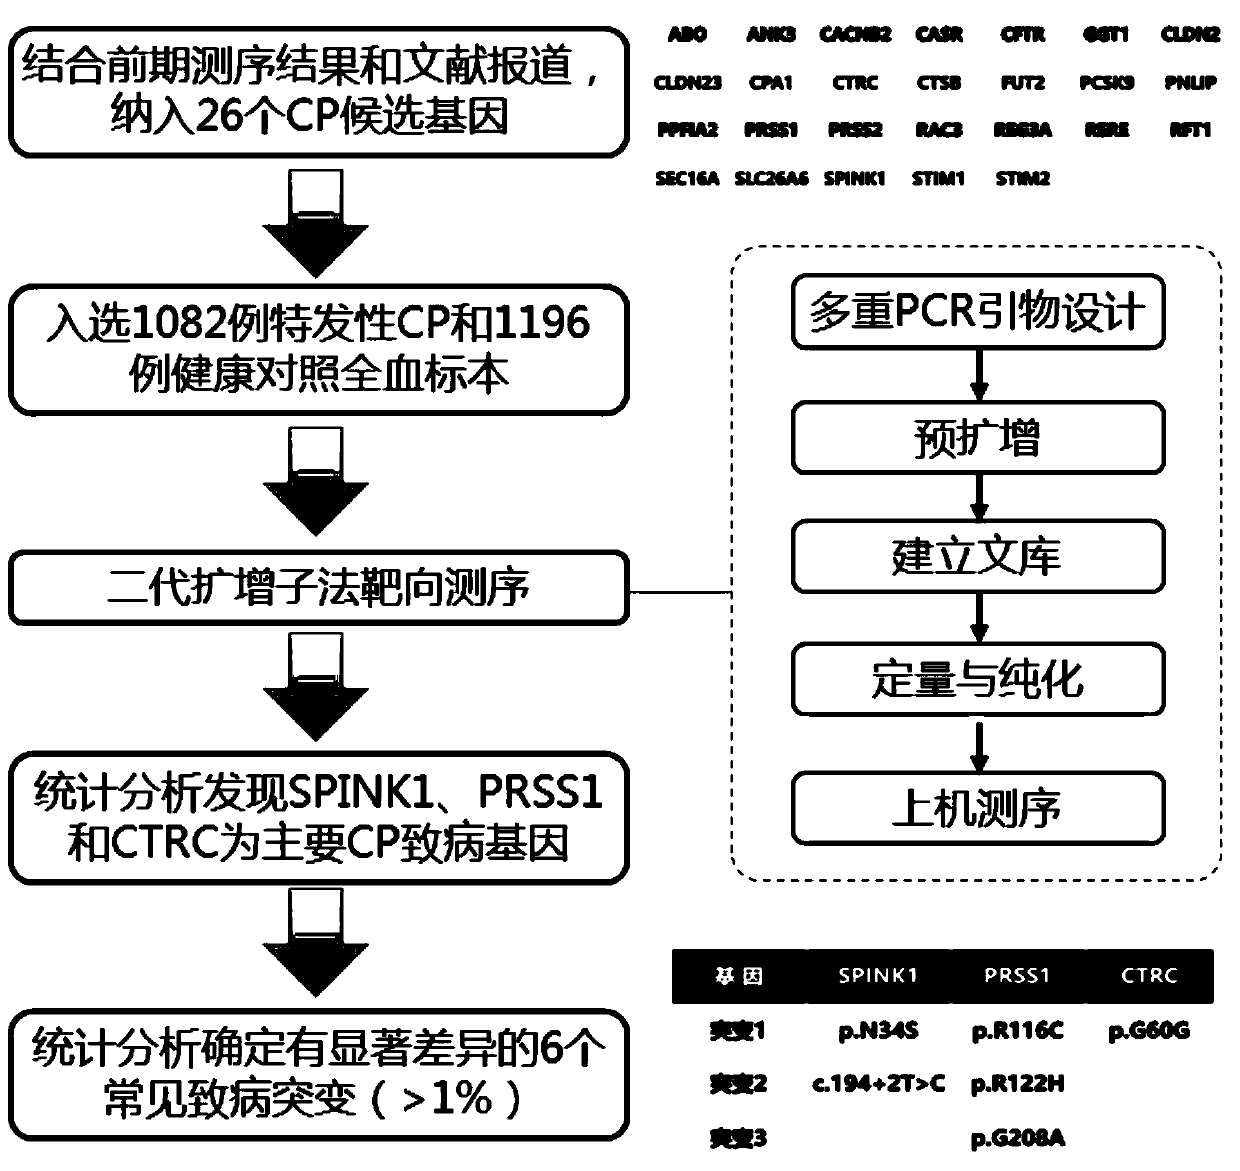 Application of a group of gene mutation sites in the preparation of reagents or kits for diagnosing chronic pancreatitis and evaluating prognosis